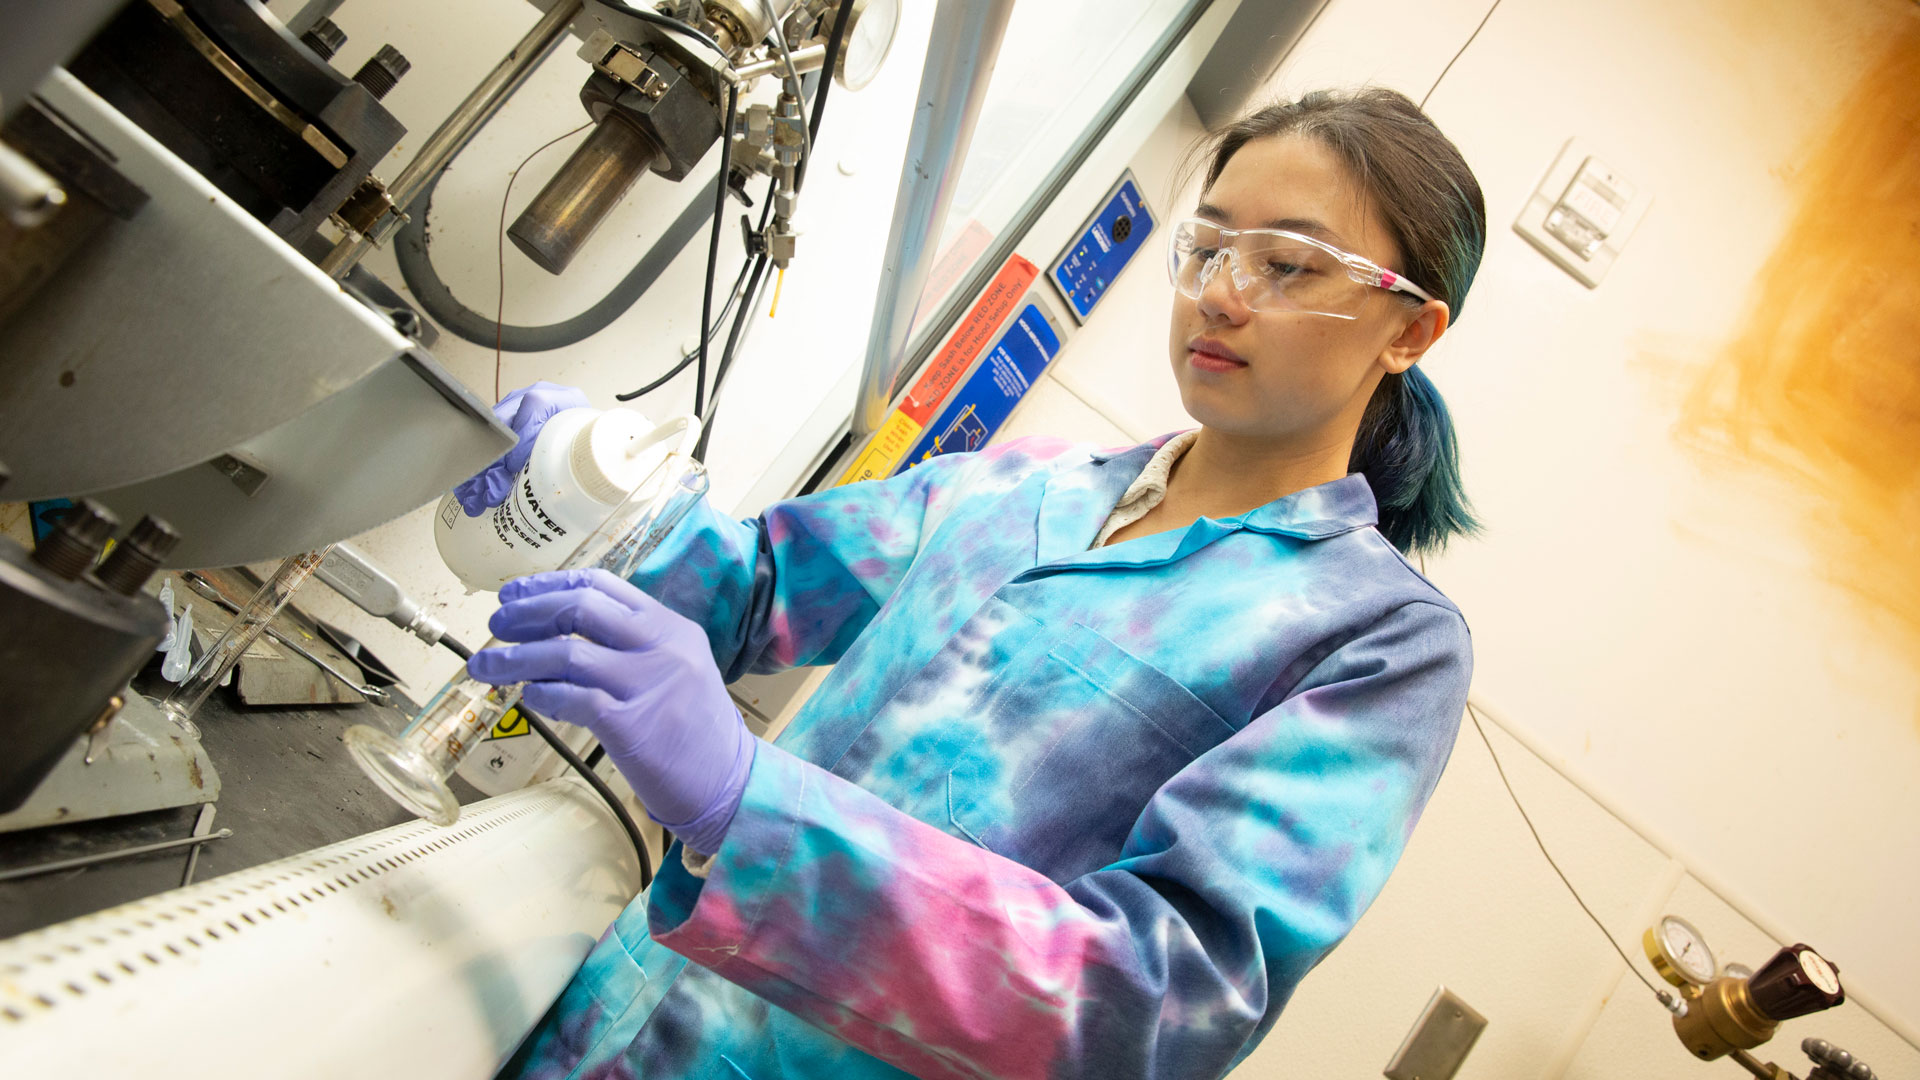 ASU chemical engineering major Kelly Nguyen works on a research project as part of the FURI program.